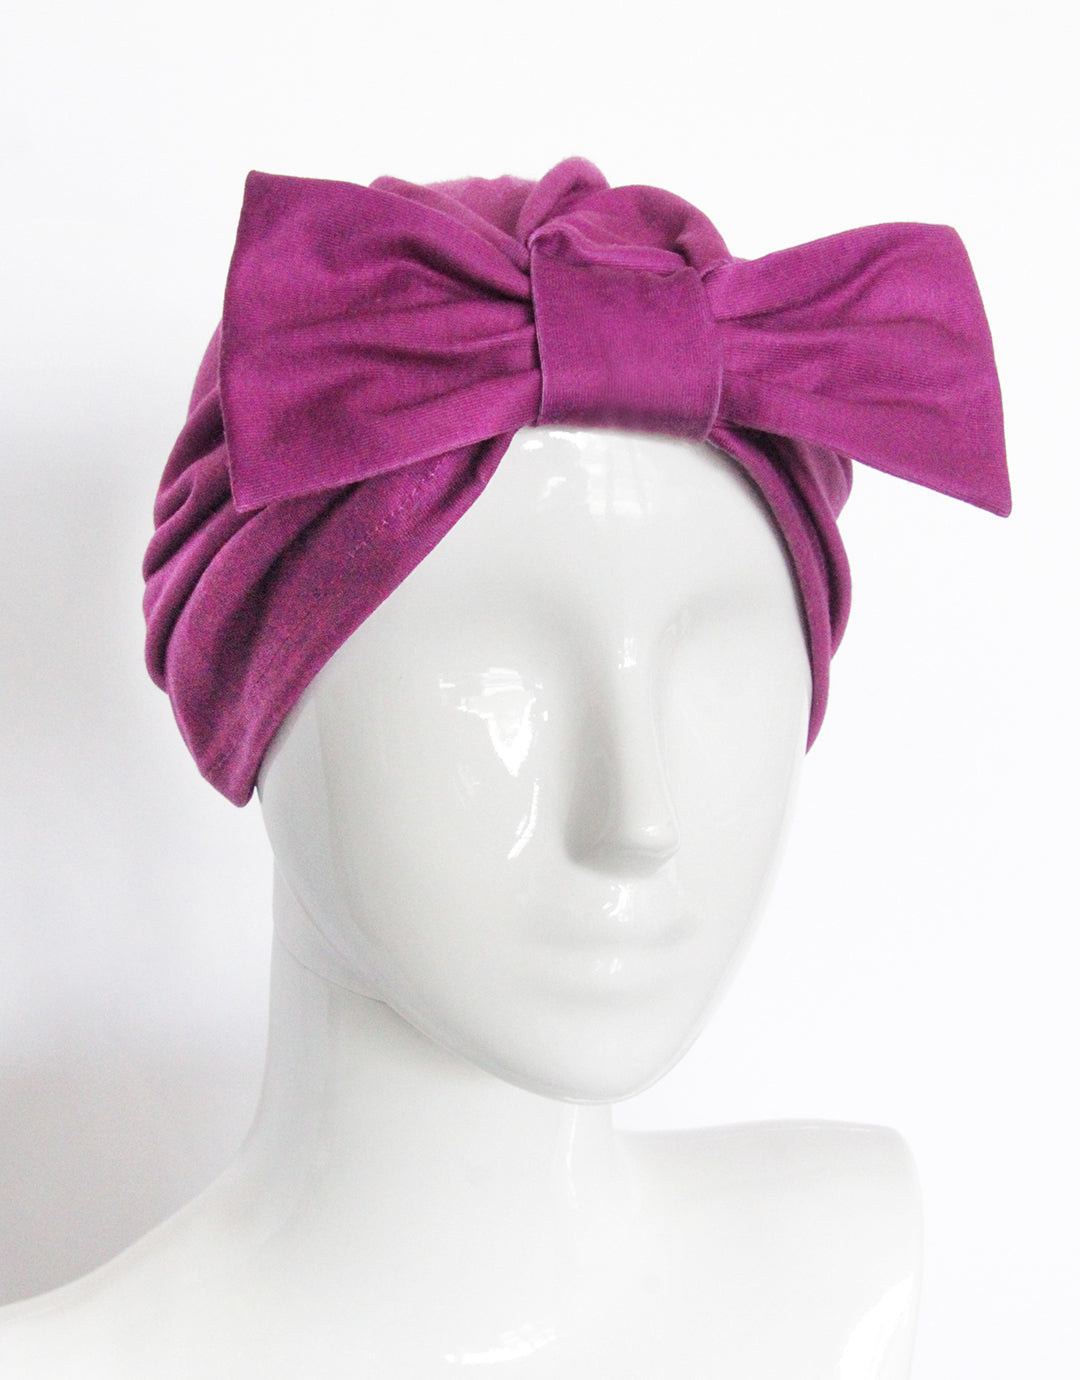 BANDED Women’s Full Coverage Headwraps + Hair Accessories - Radiant Sky - Fashion Turban